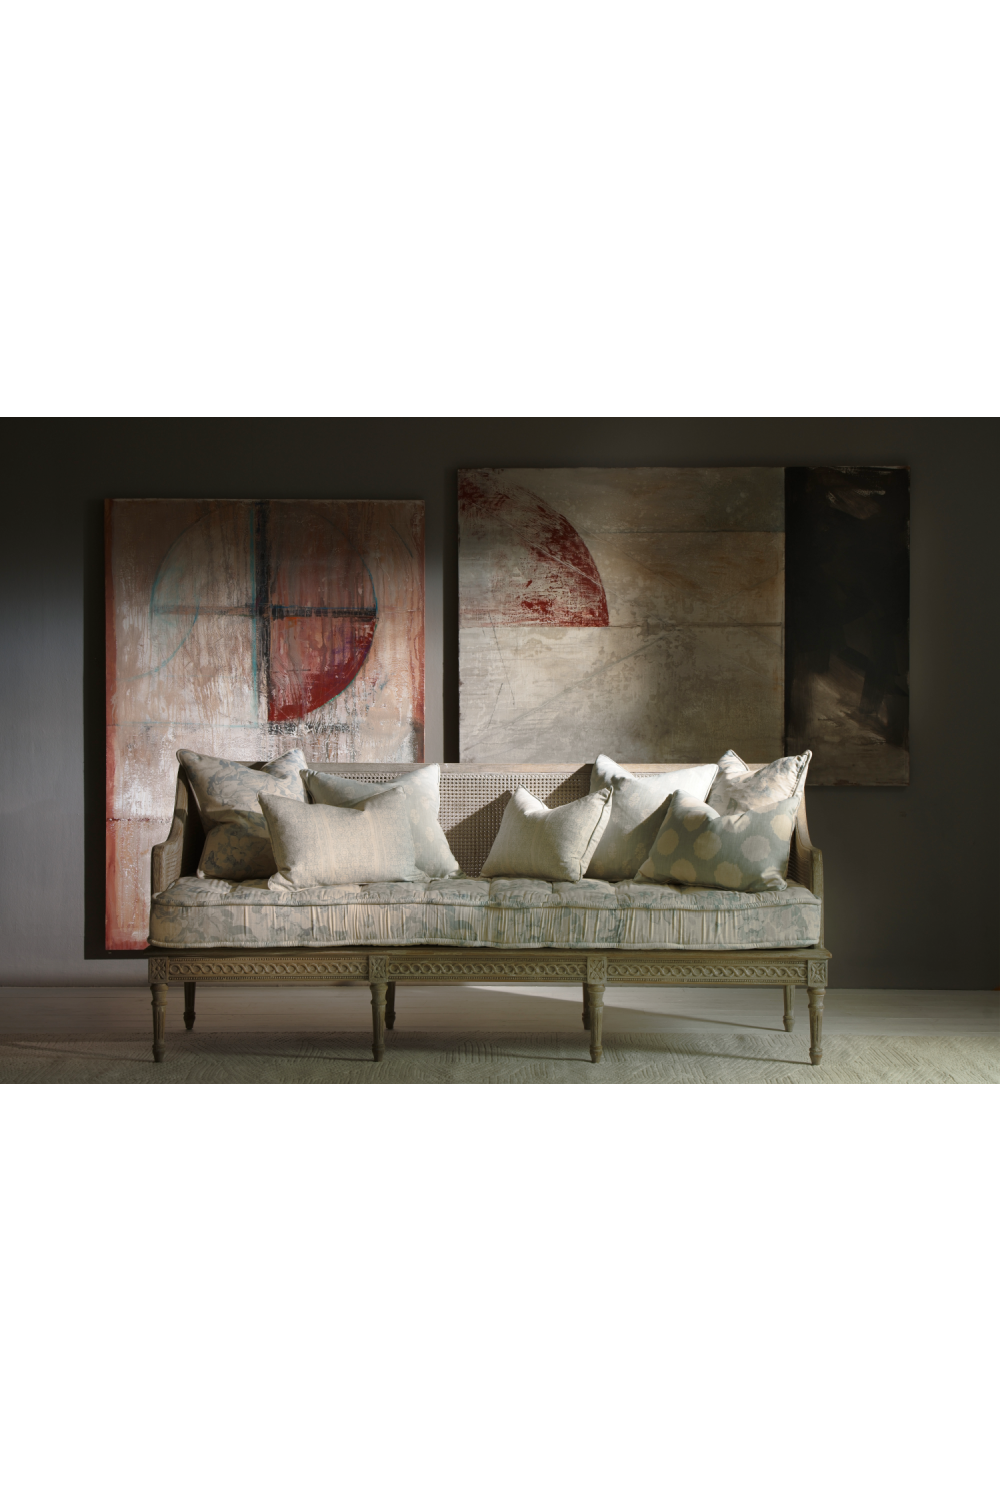 Indian Floral Cushion | Andrew Martin Buttercup | Oroa.com